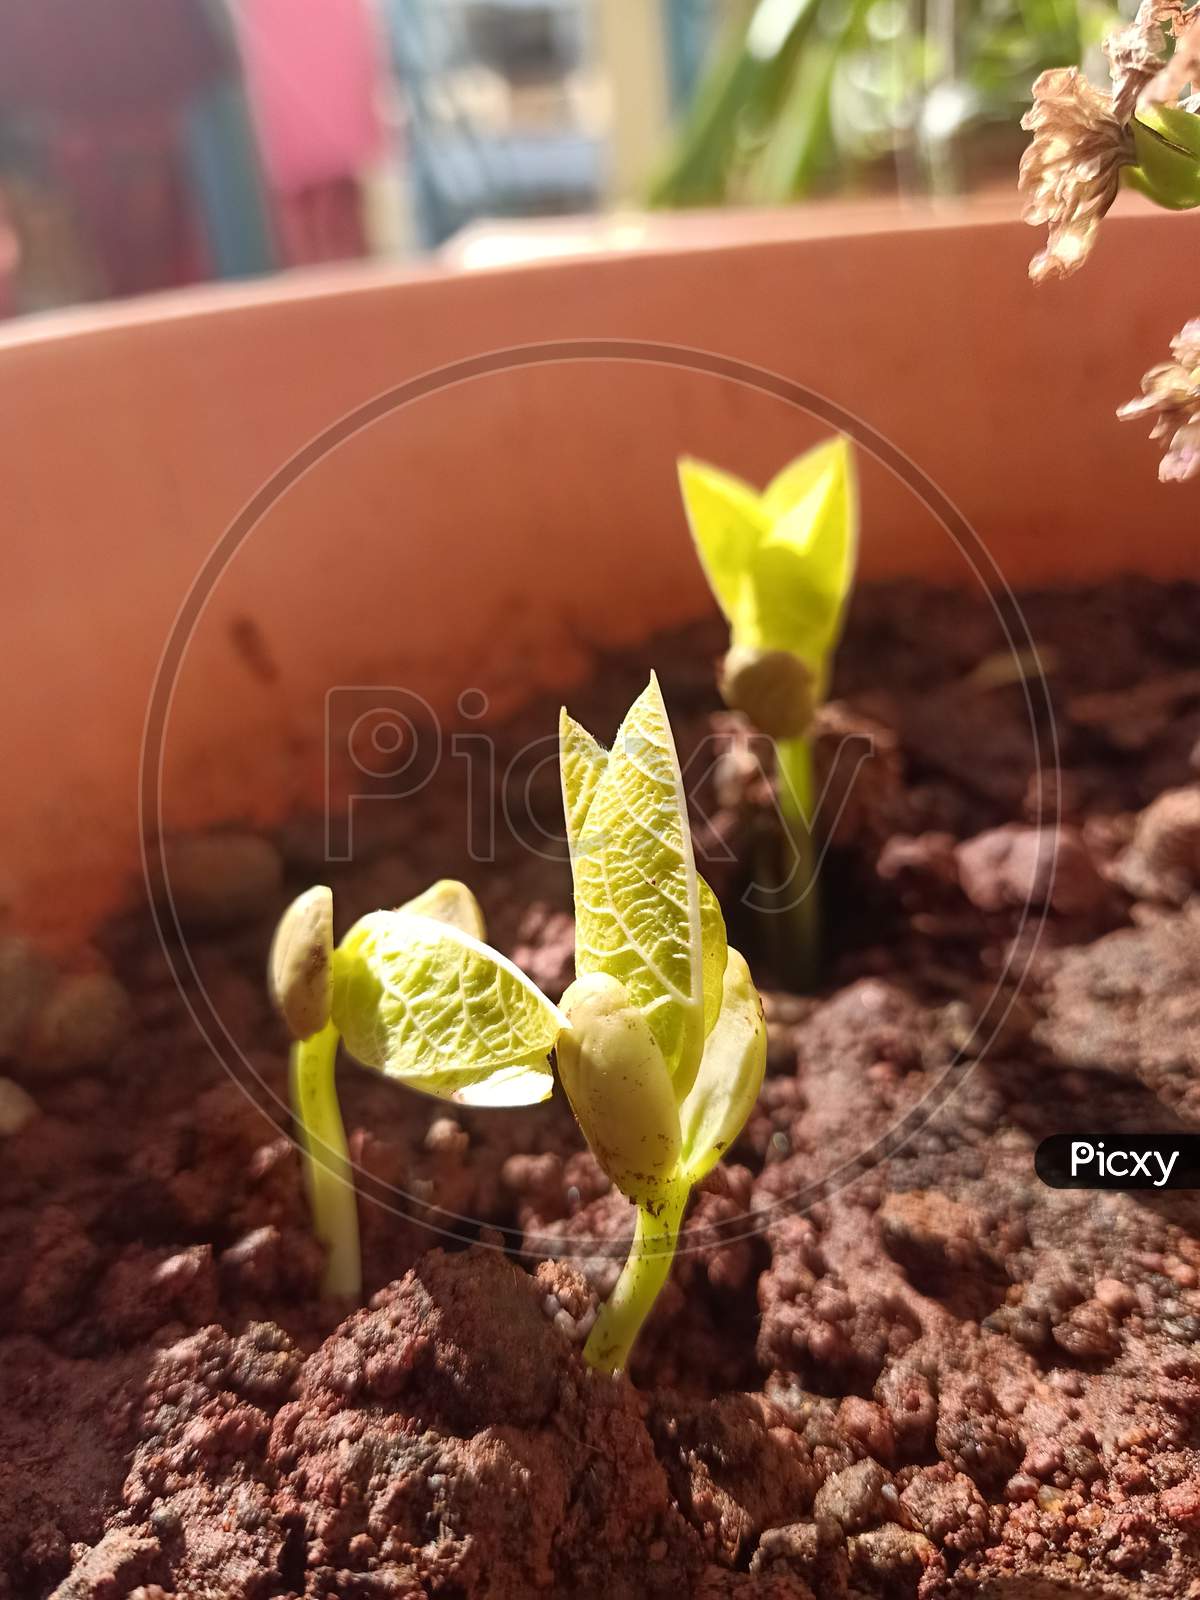 Tiny sprouting plant coming out of the soil. fresh, young, new life, bright, positivity, and hopefulness concept.